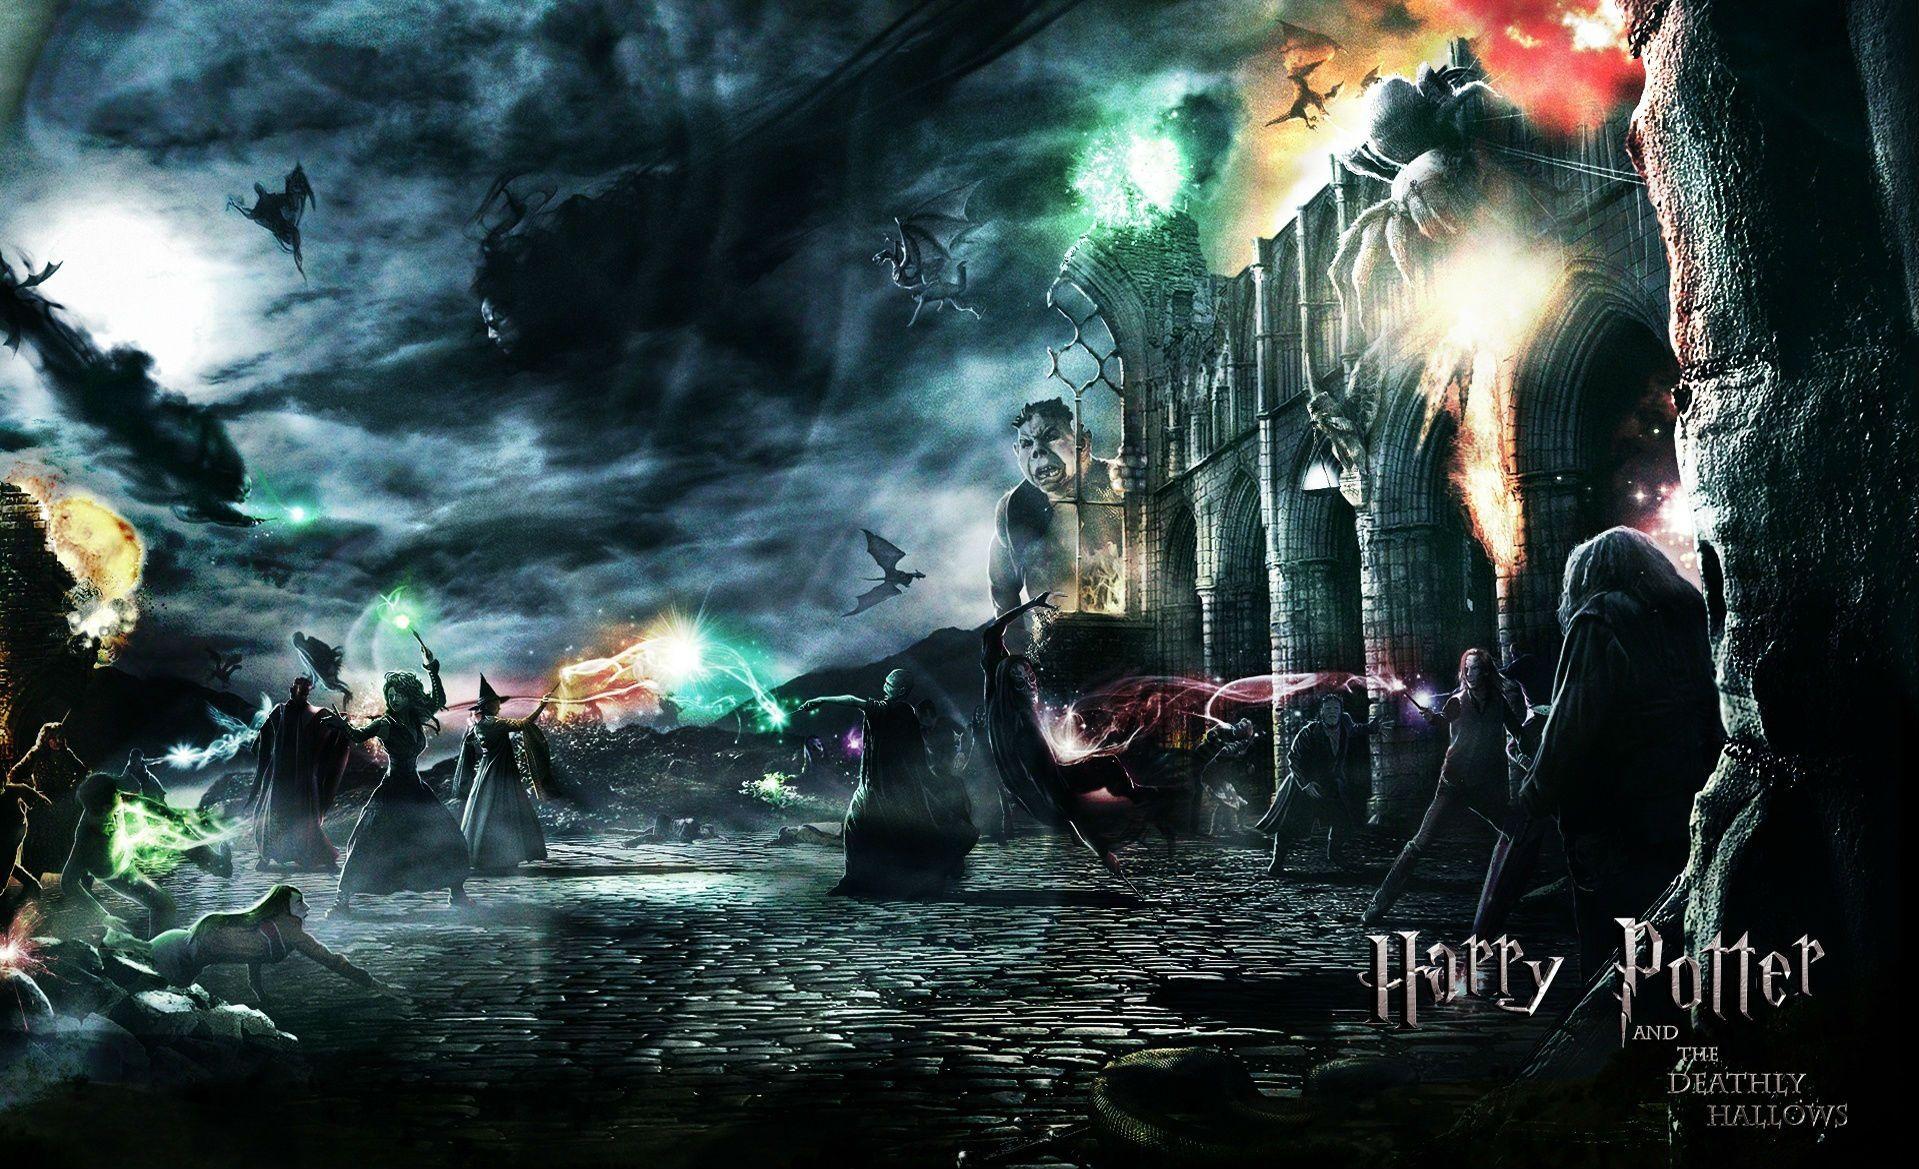 Wallpaper (tapety). Deathly hallows wallpaper, Harry potter wallpaper, Harry potter